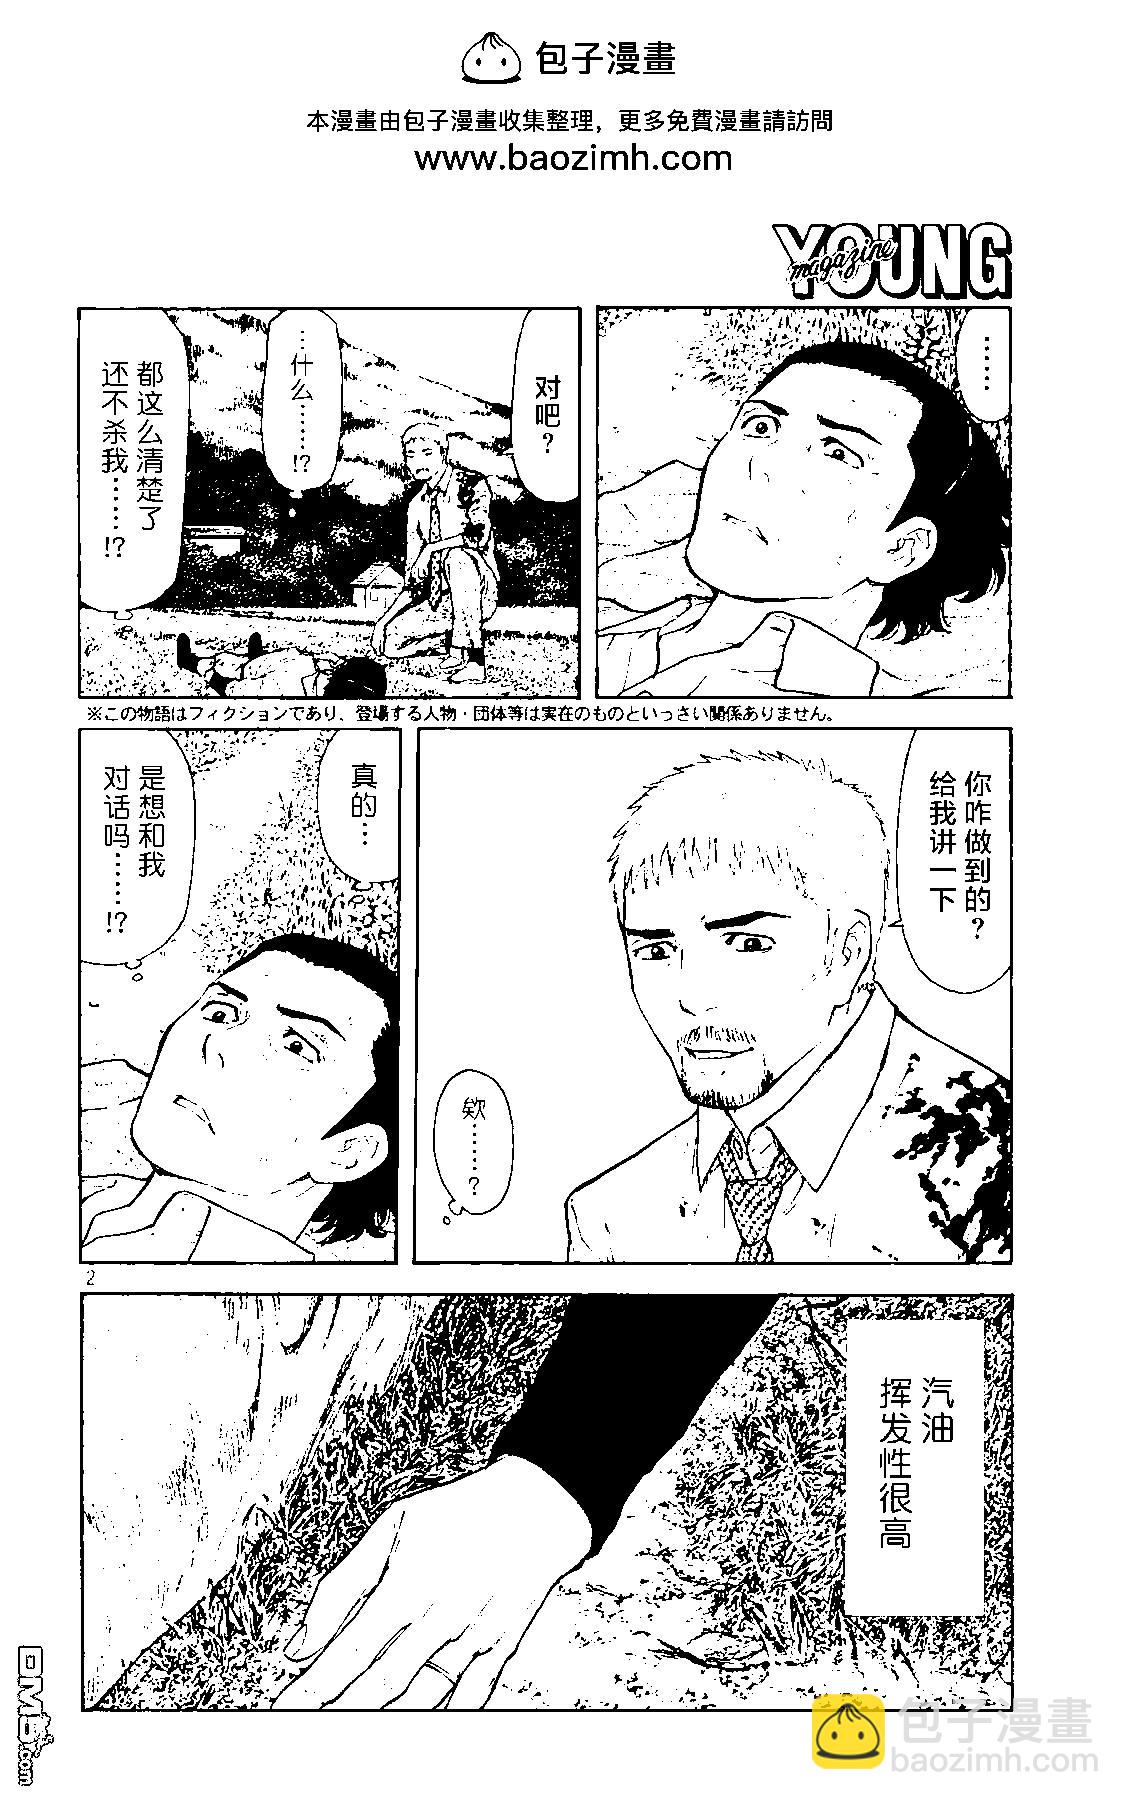 MY HOME HERO - 第146話 兩人的對話 - 2